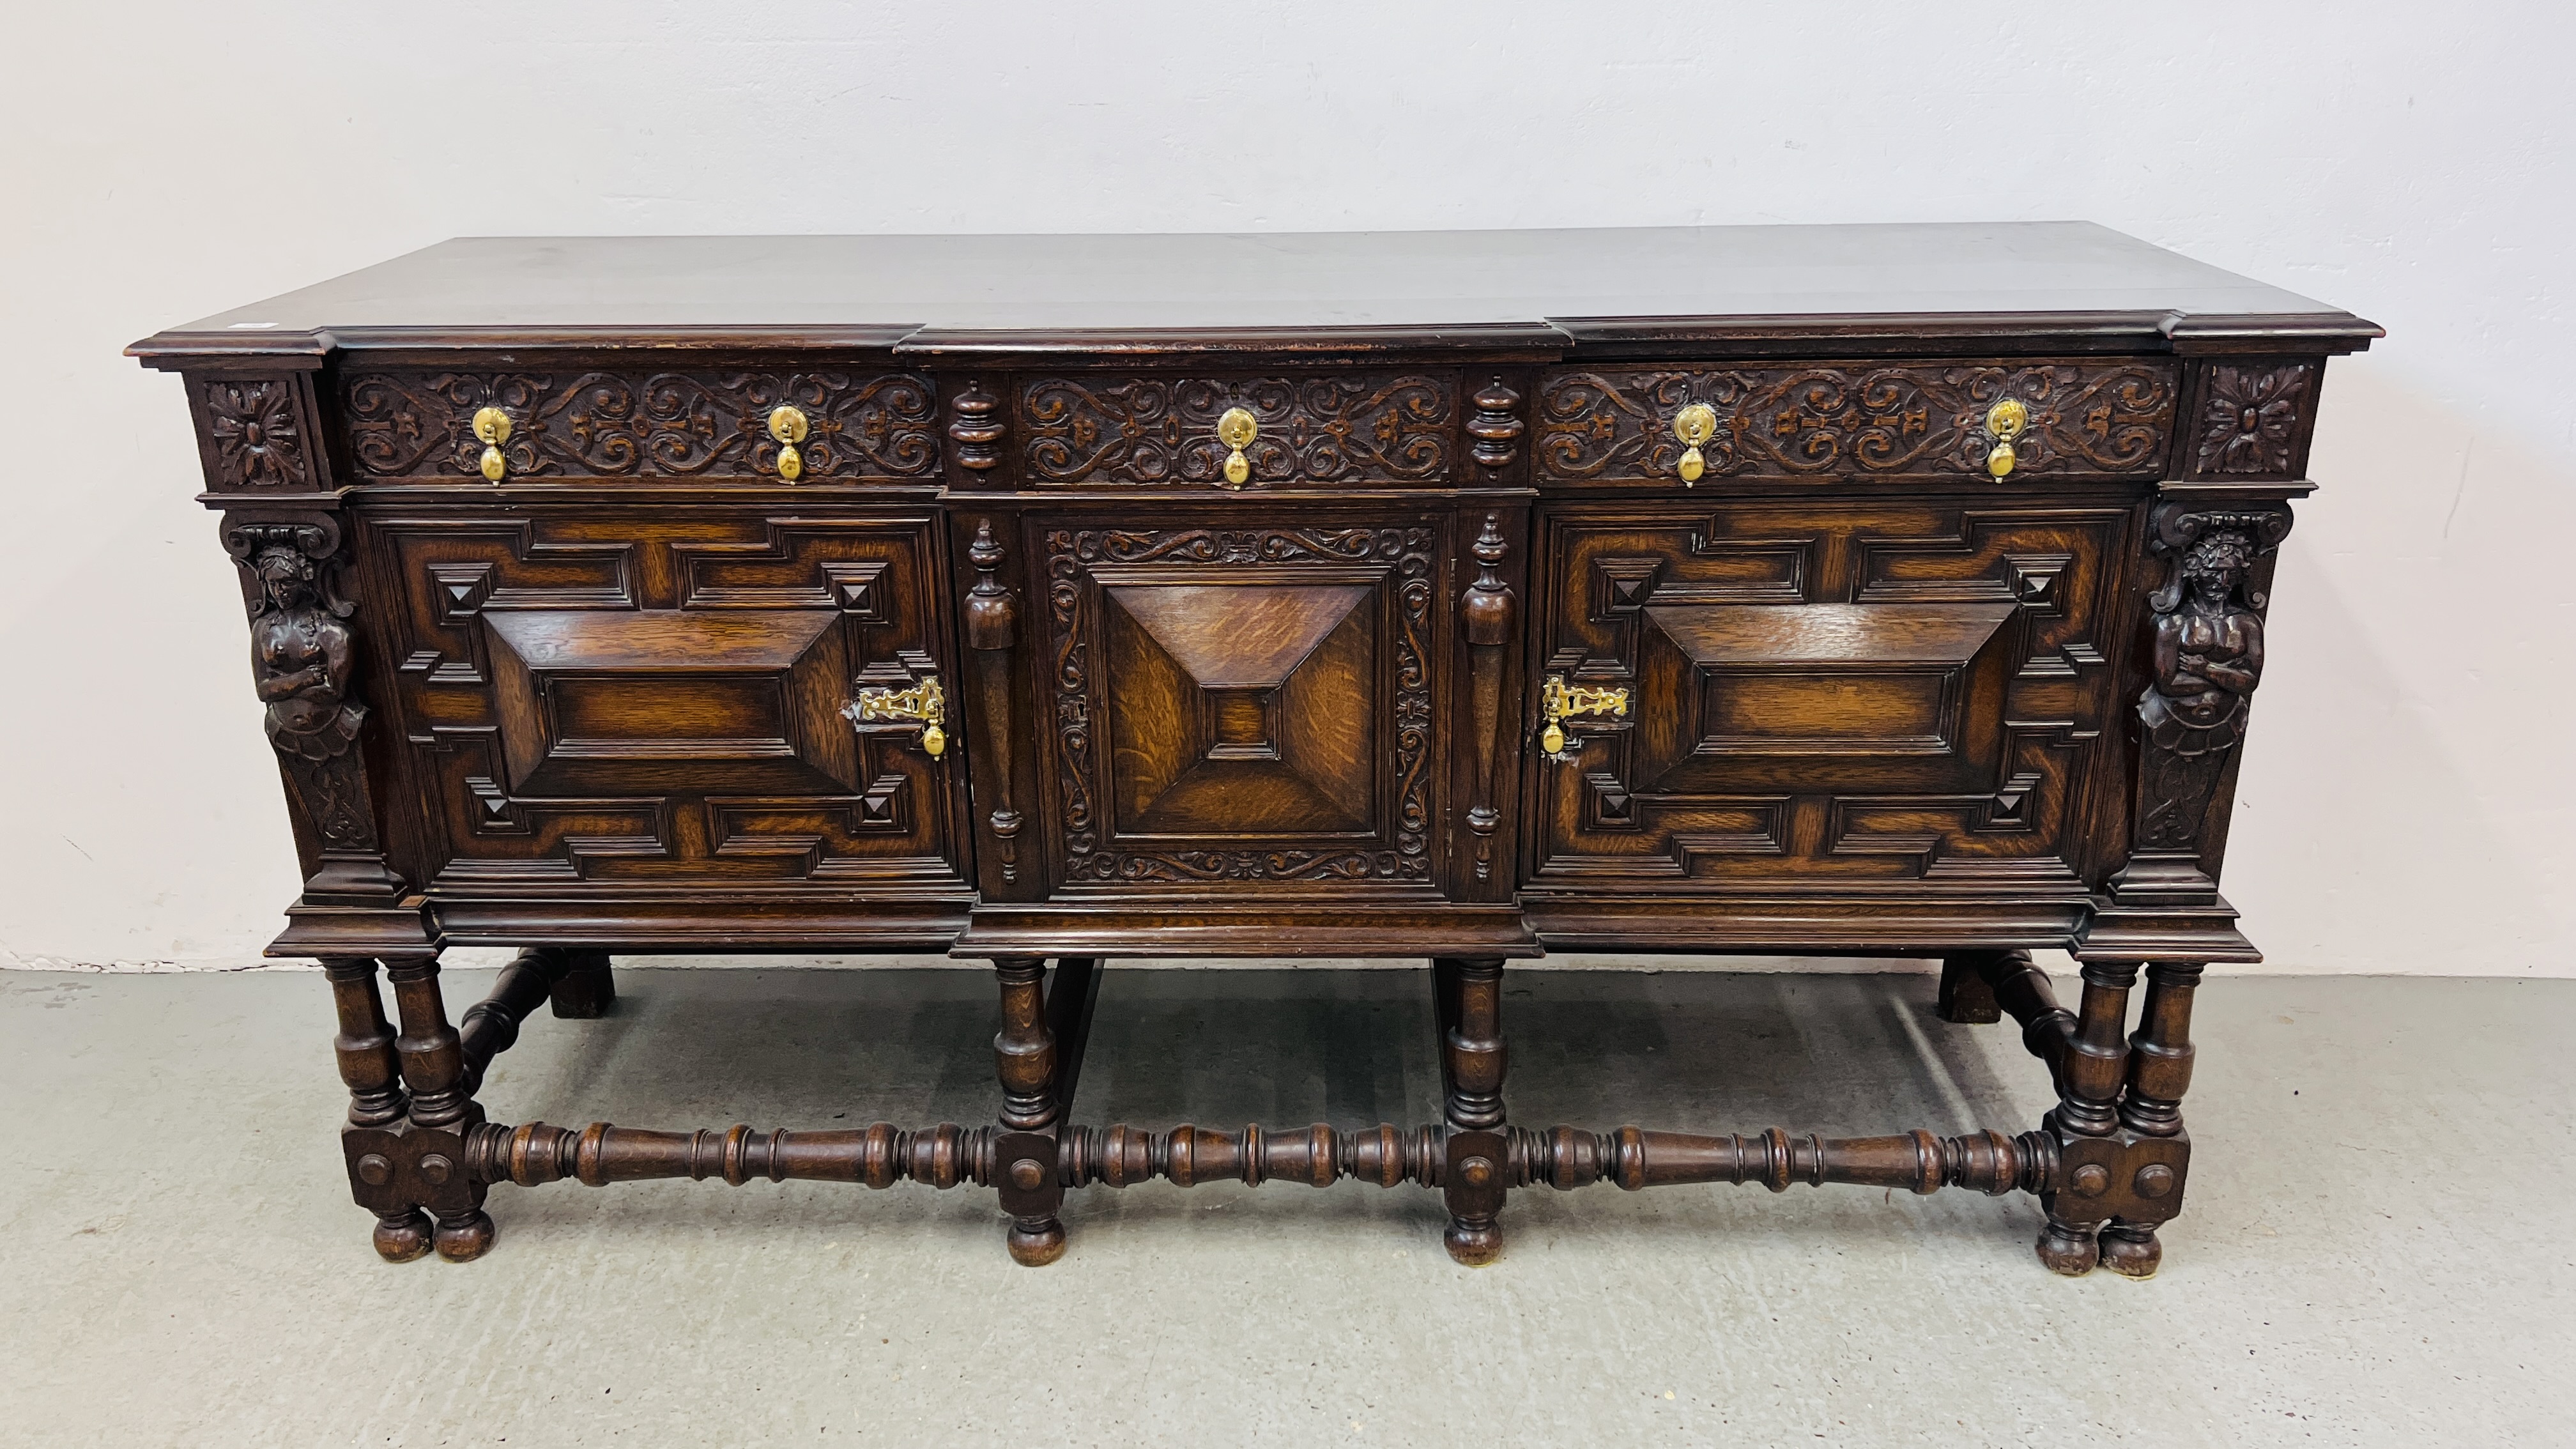 A C20TH CARVED OAK SIDEBOARD IN C17TH STYLE BY HAMPTONS OF LONDON W 198CM, D 66CM, H 101CM.